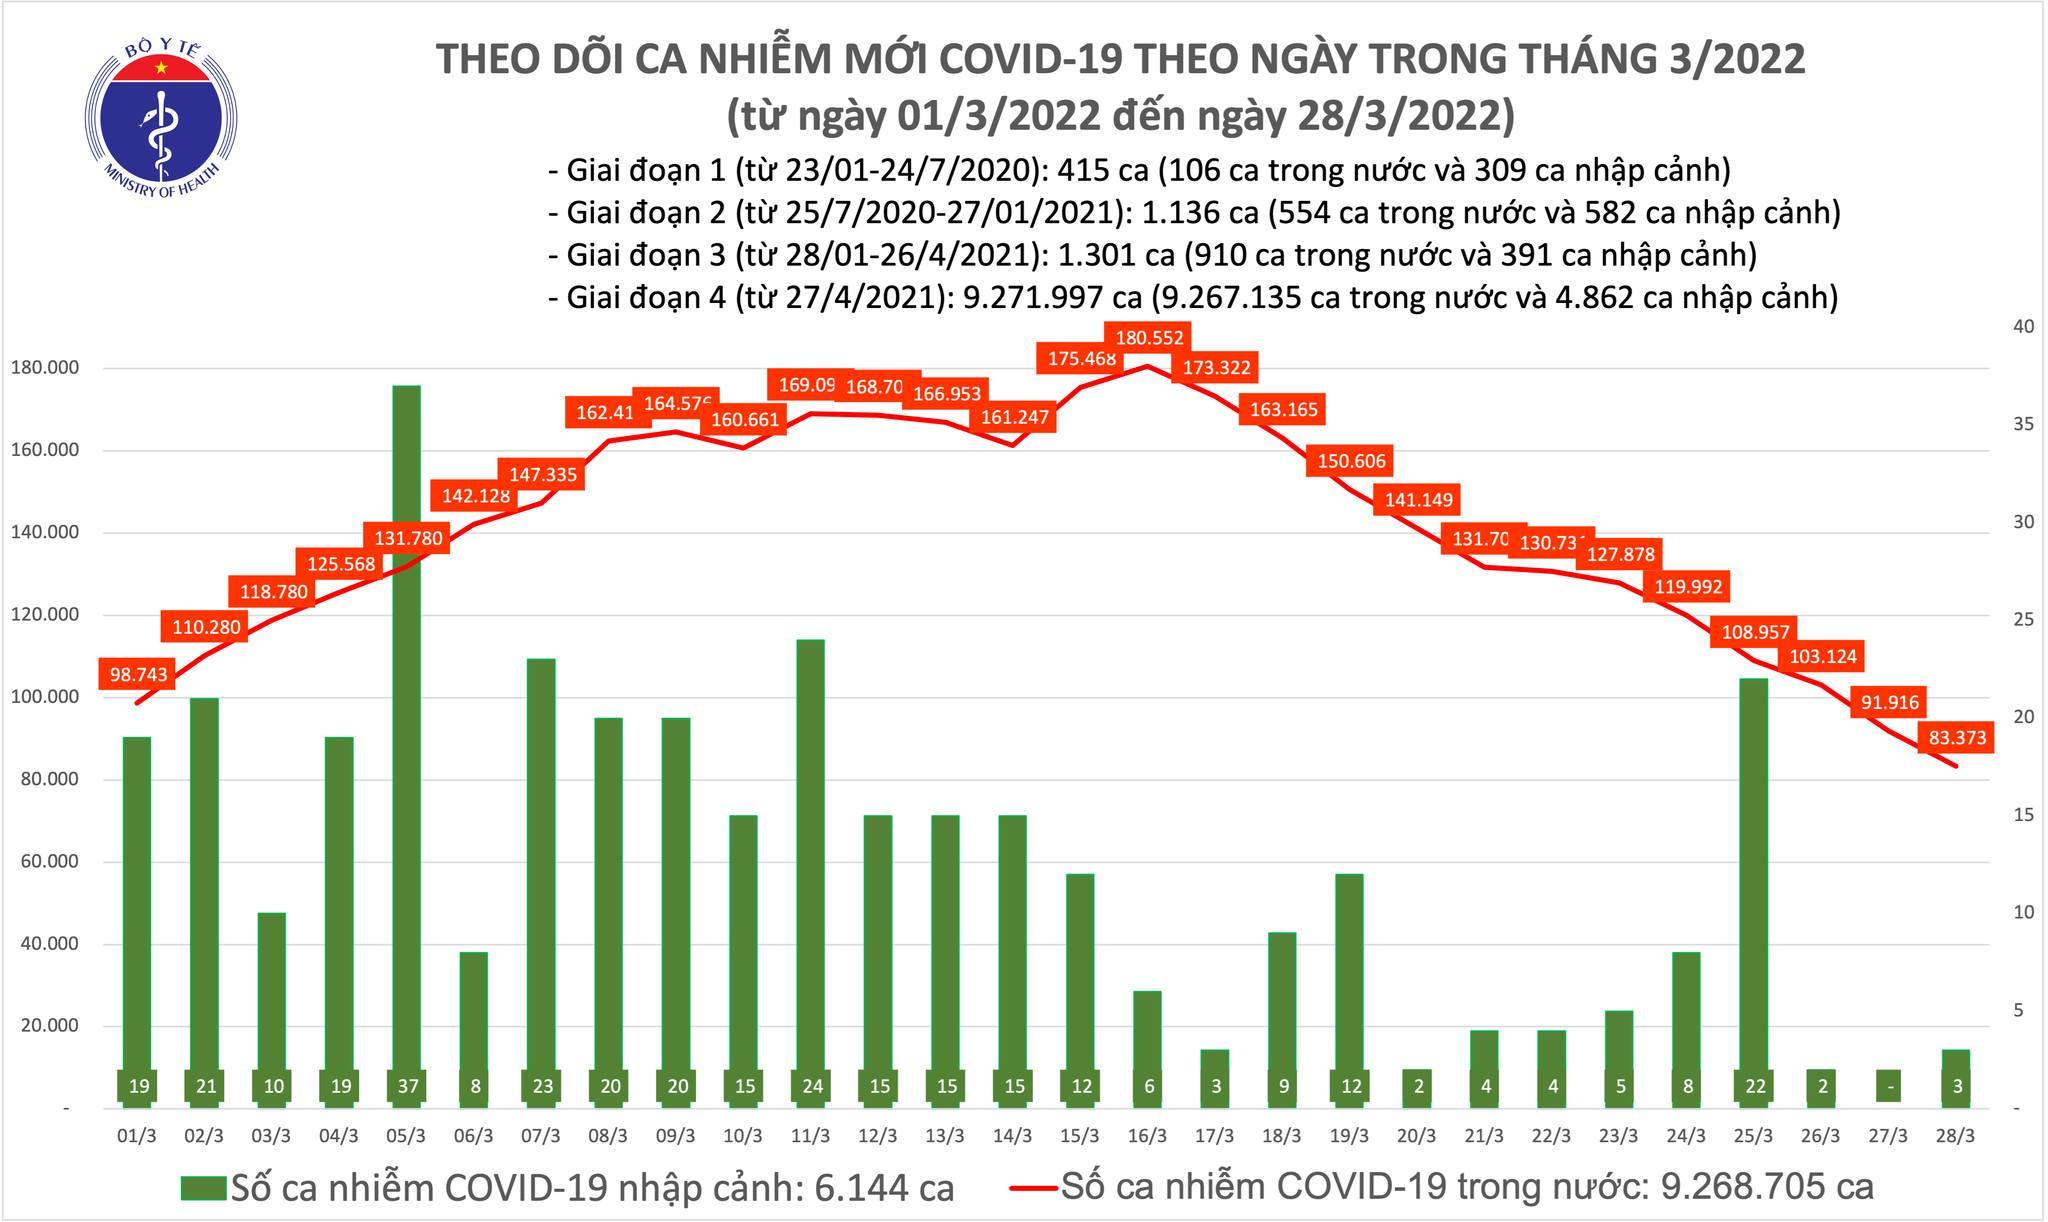 The whole country has 83,376 new Covid-19 cases, Hanoi applies for an additional 180,000 cases